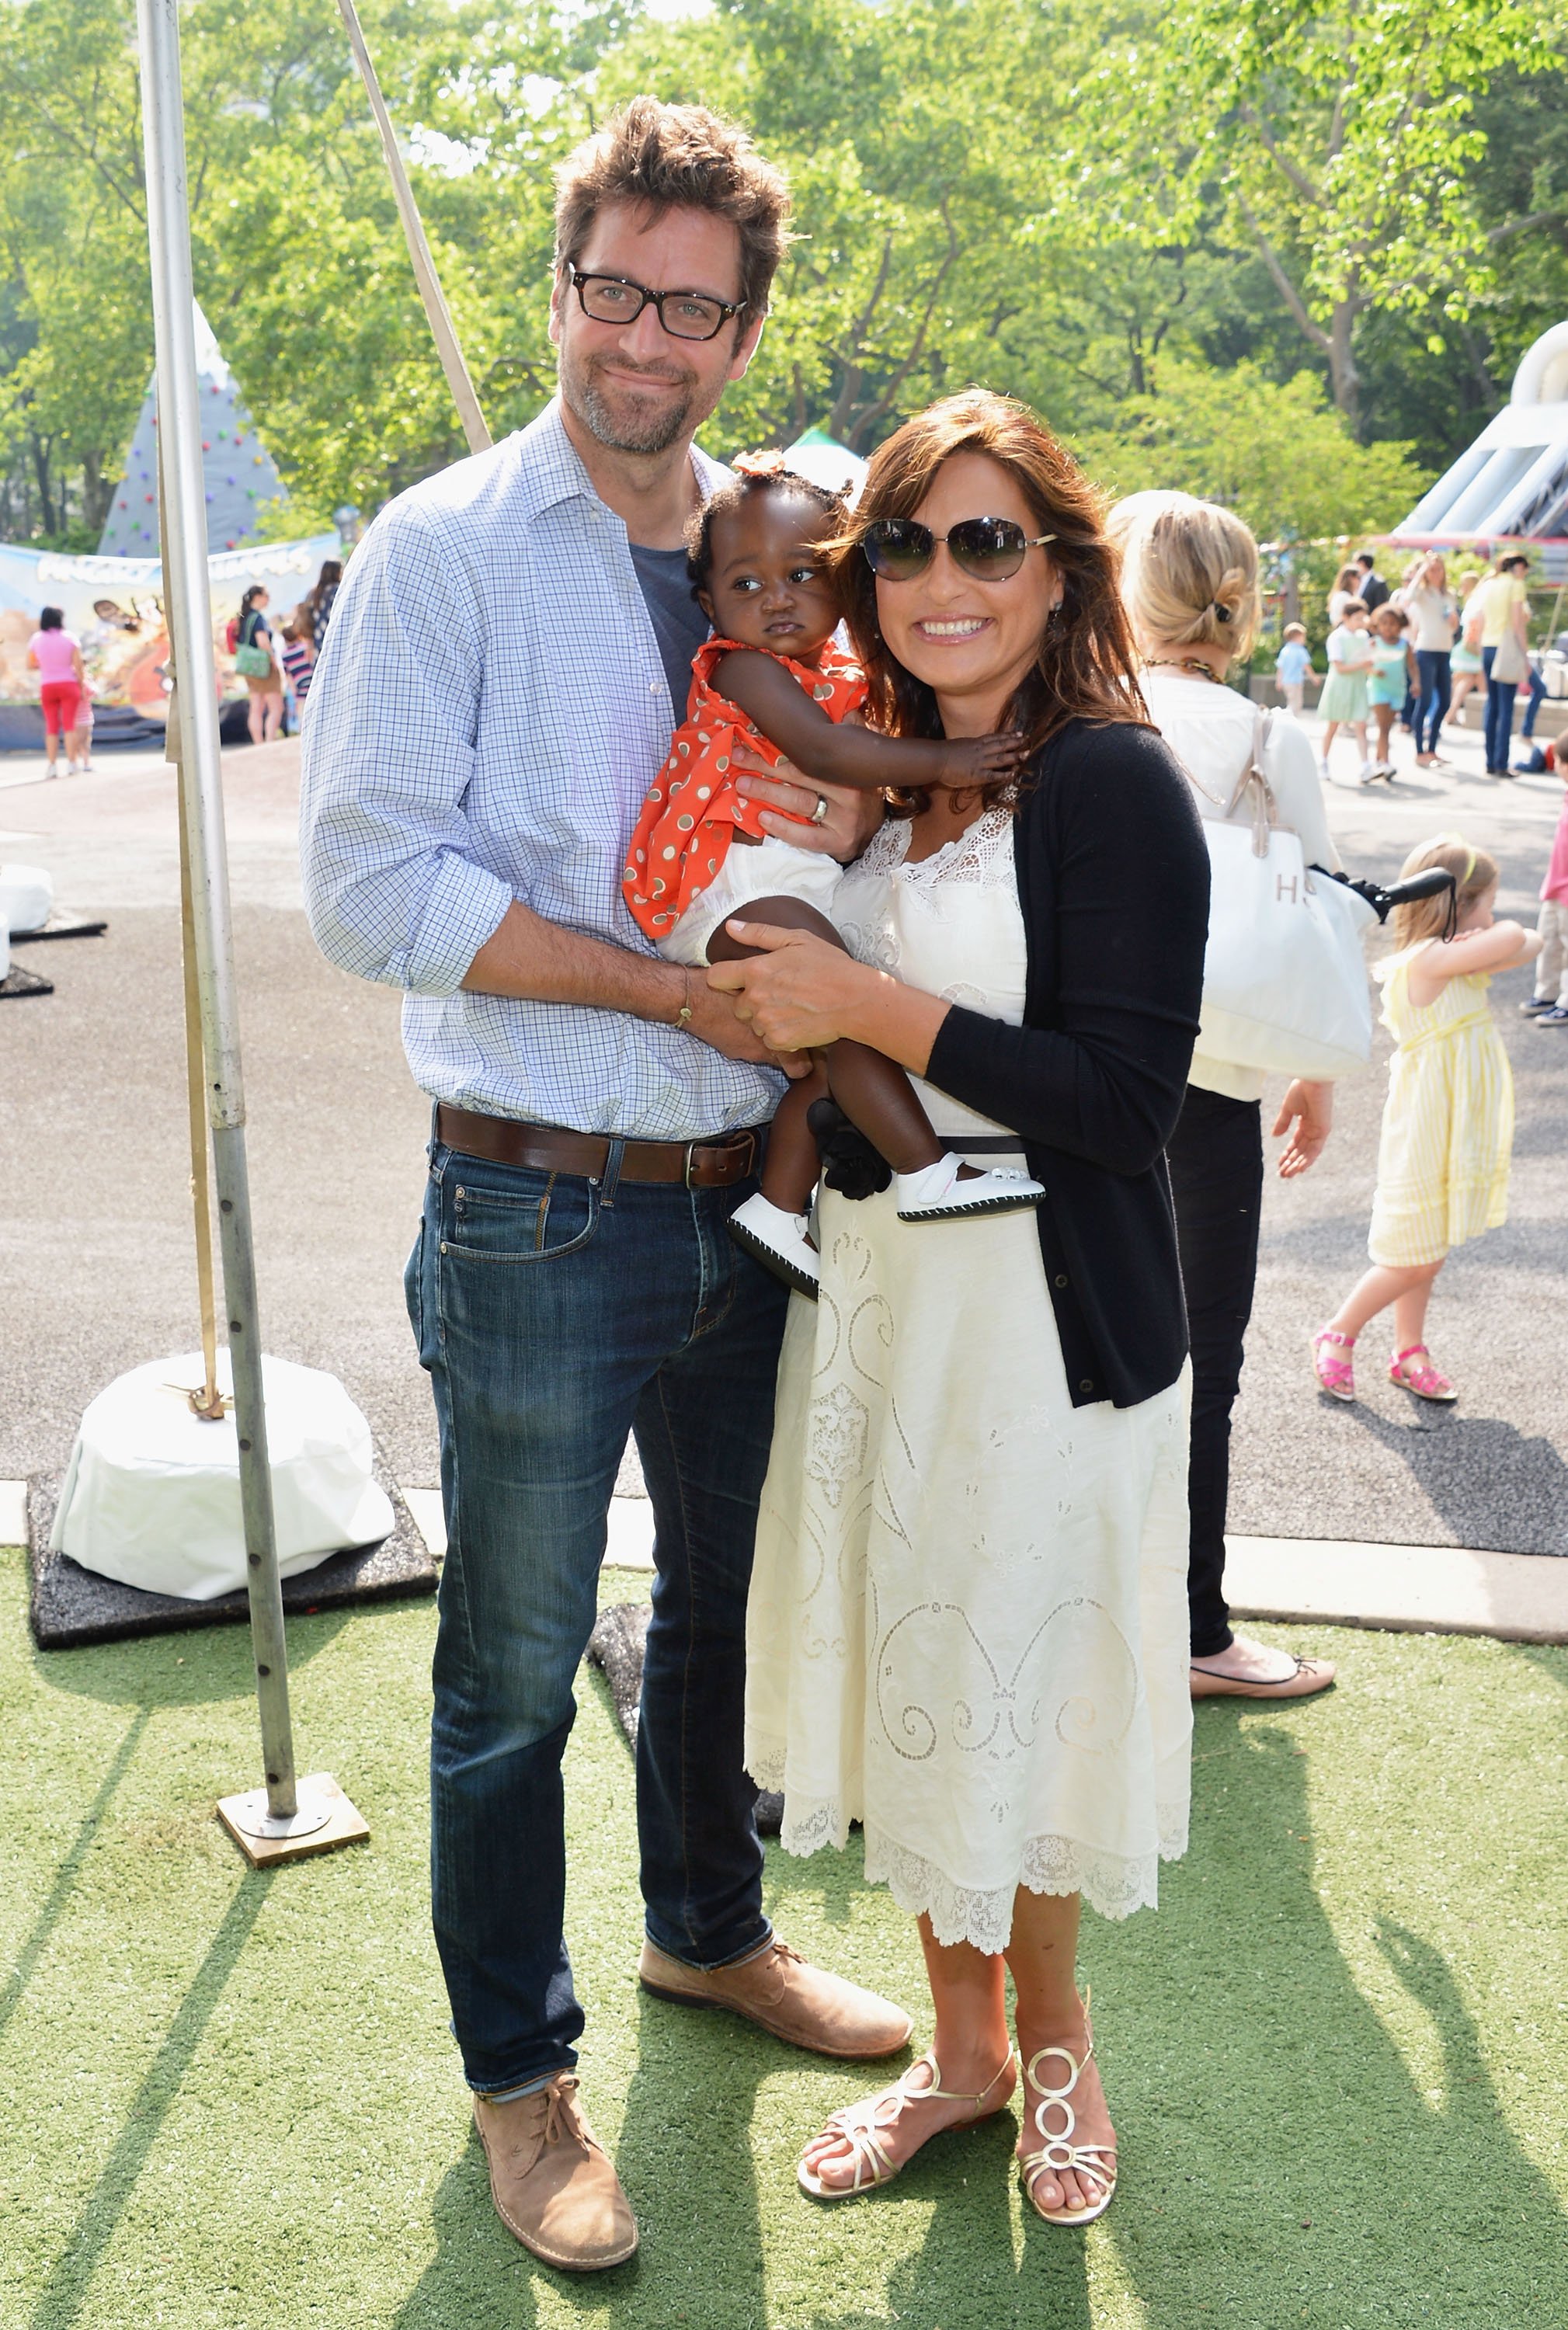  Peter Hermann and Mariska Hargitay with their daughter, Amaya at the 20th Annual Playground Partners Family Party at Central Park, Heckscher Softball Fields on May 23, 2012. | Photo: Getty Images